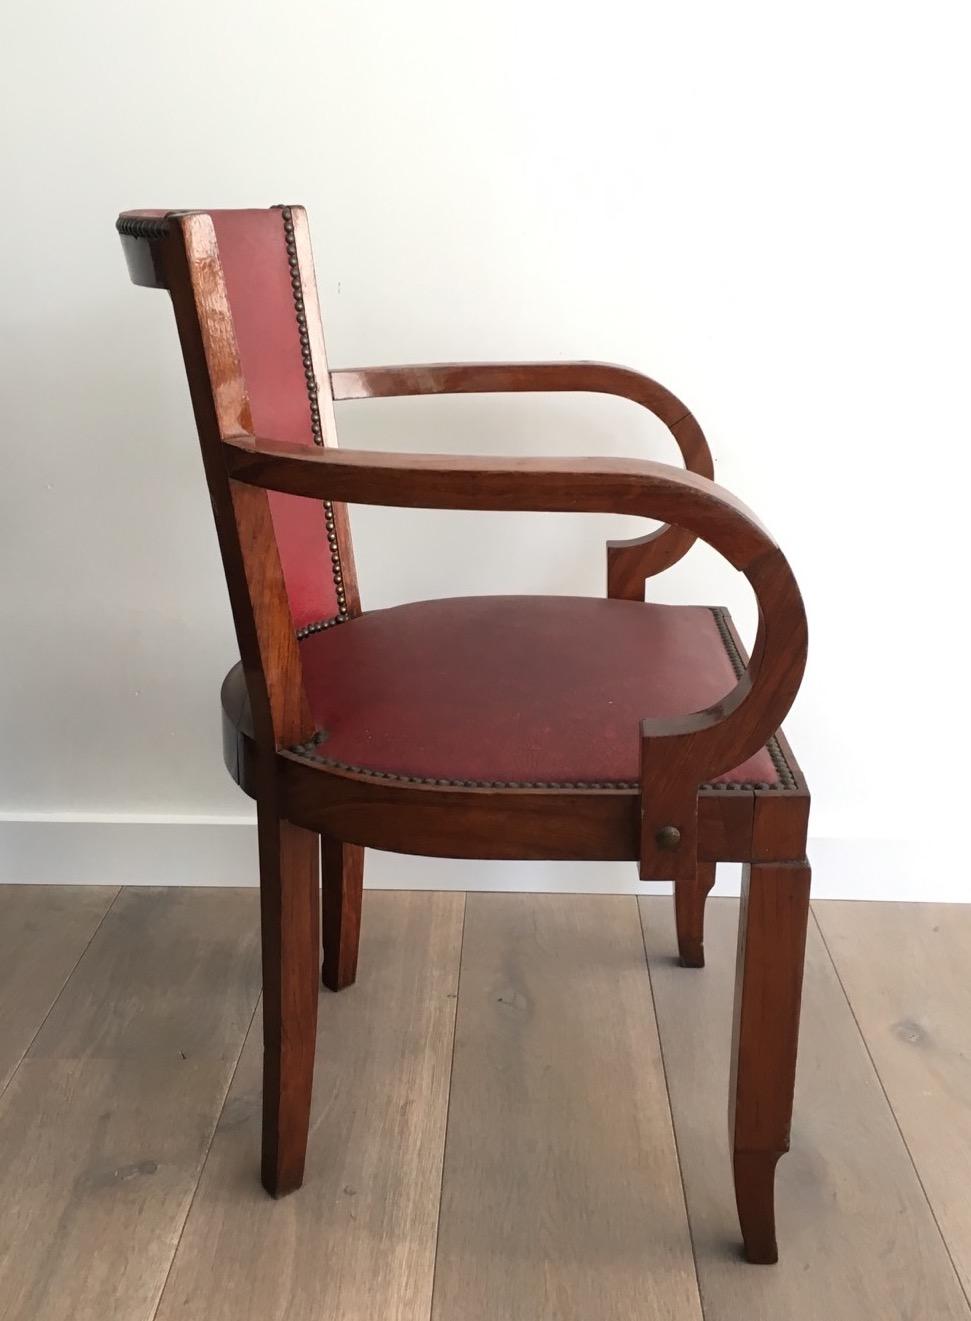 Rare Set of 8 Mahogany and Faux-Leather Art Deco Armchairs, French, circa 1930 For Sale 10